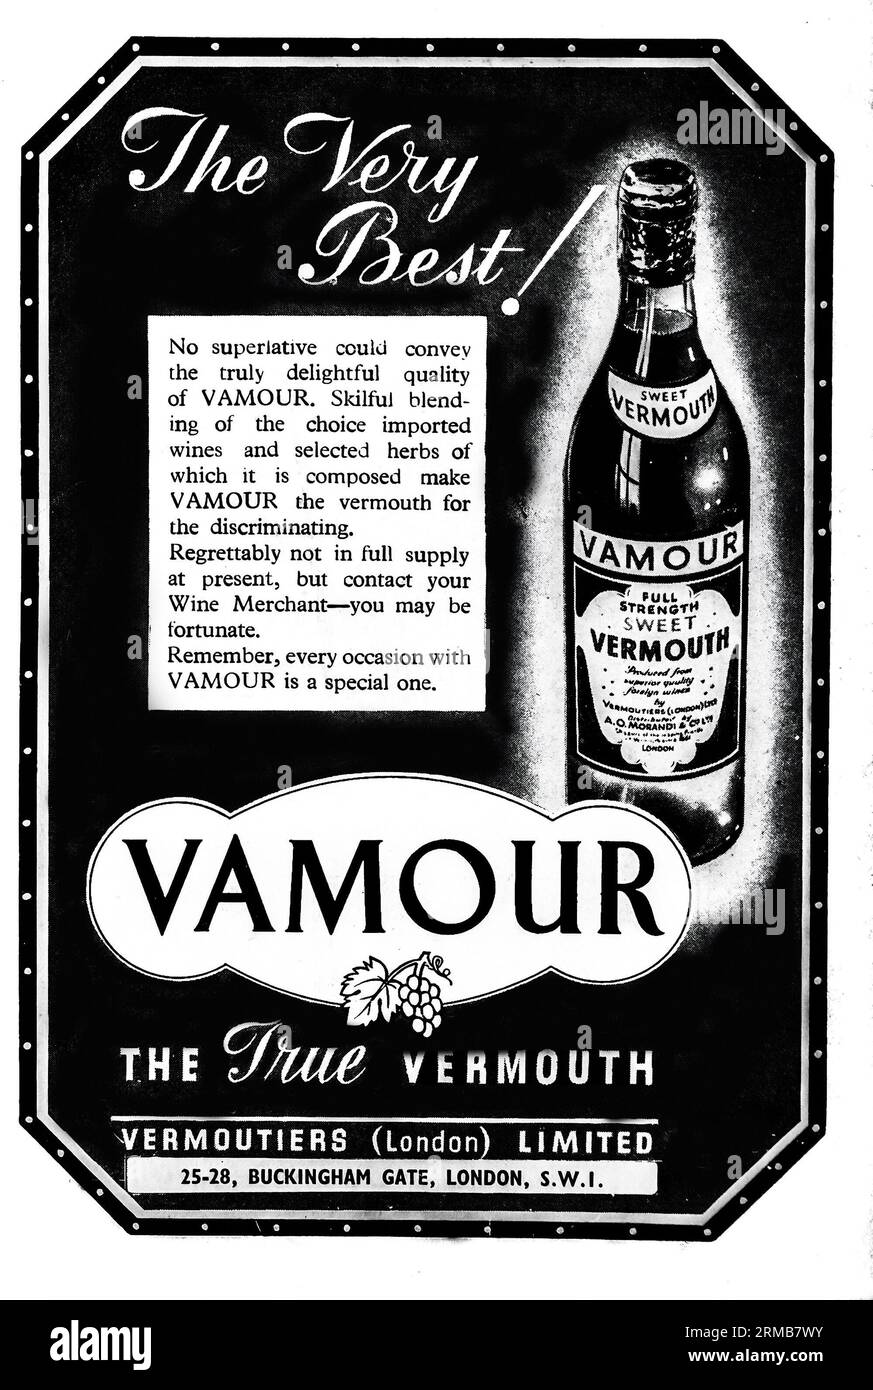 A 1942 wartime advertisement for Vamour Vermouth, marketed by Vermouthiers (London) Ltd. The label describes Vamour as a full strength sweet Vermouth produced from superior quality foreign wines. The advertisement goes on to say that regrettably is not in full supply at present-reference to the ongoing war Stock Photo